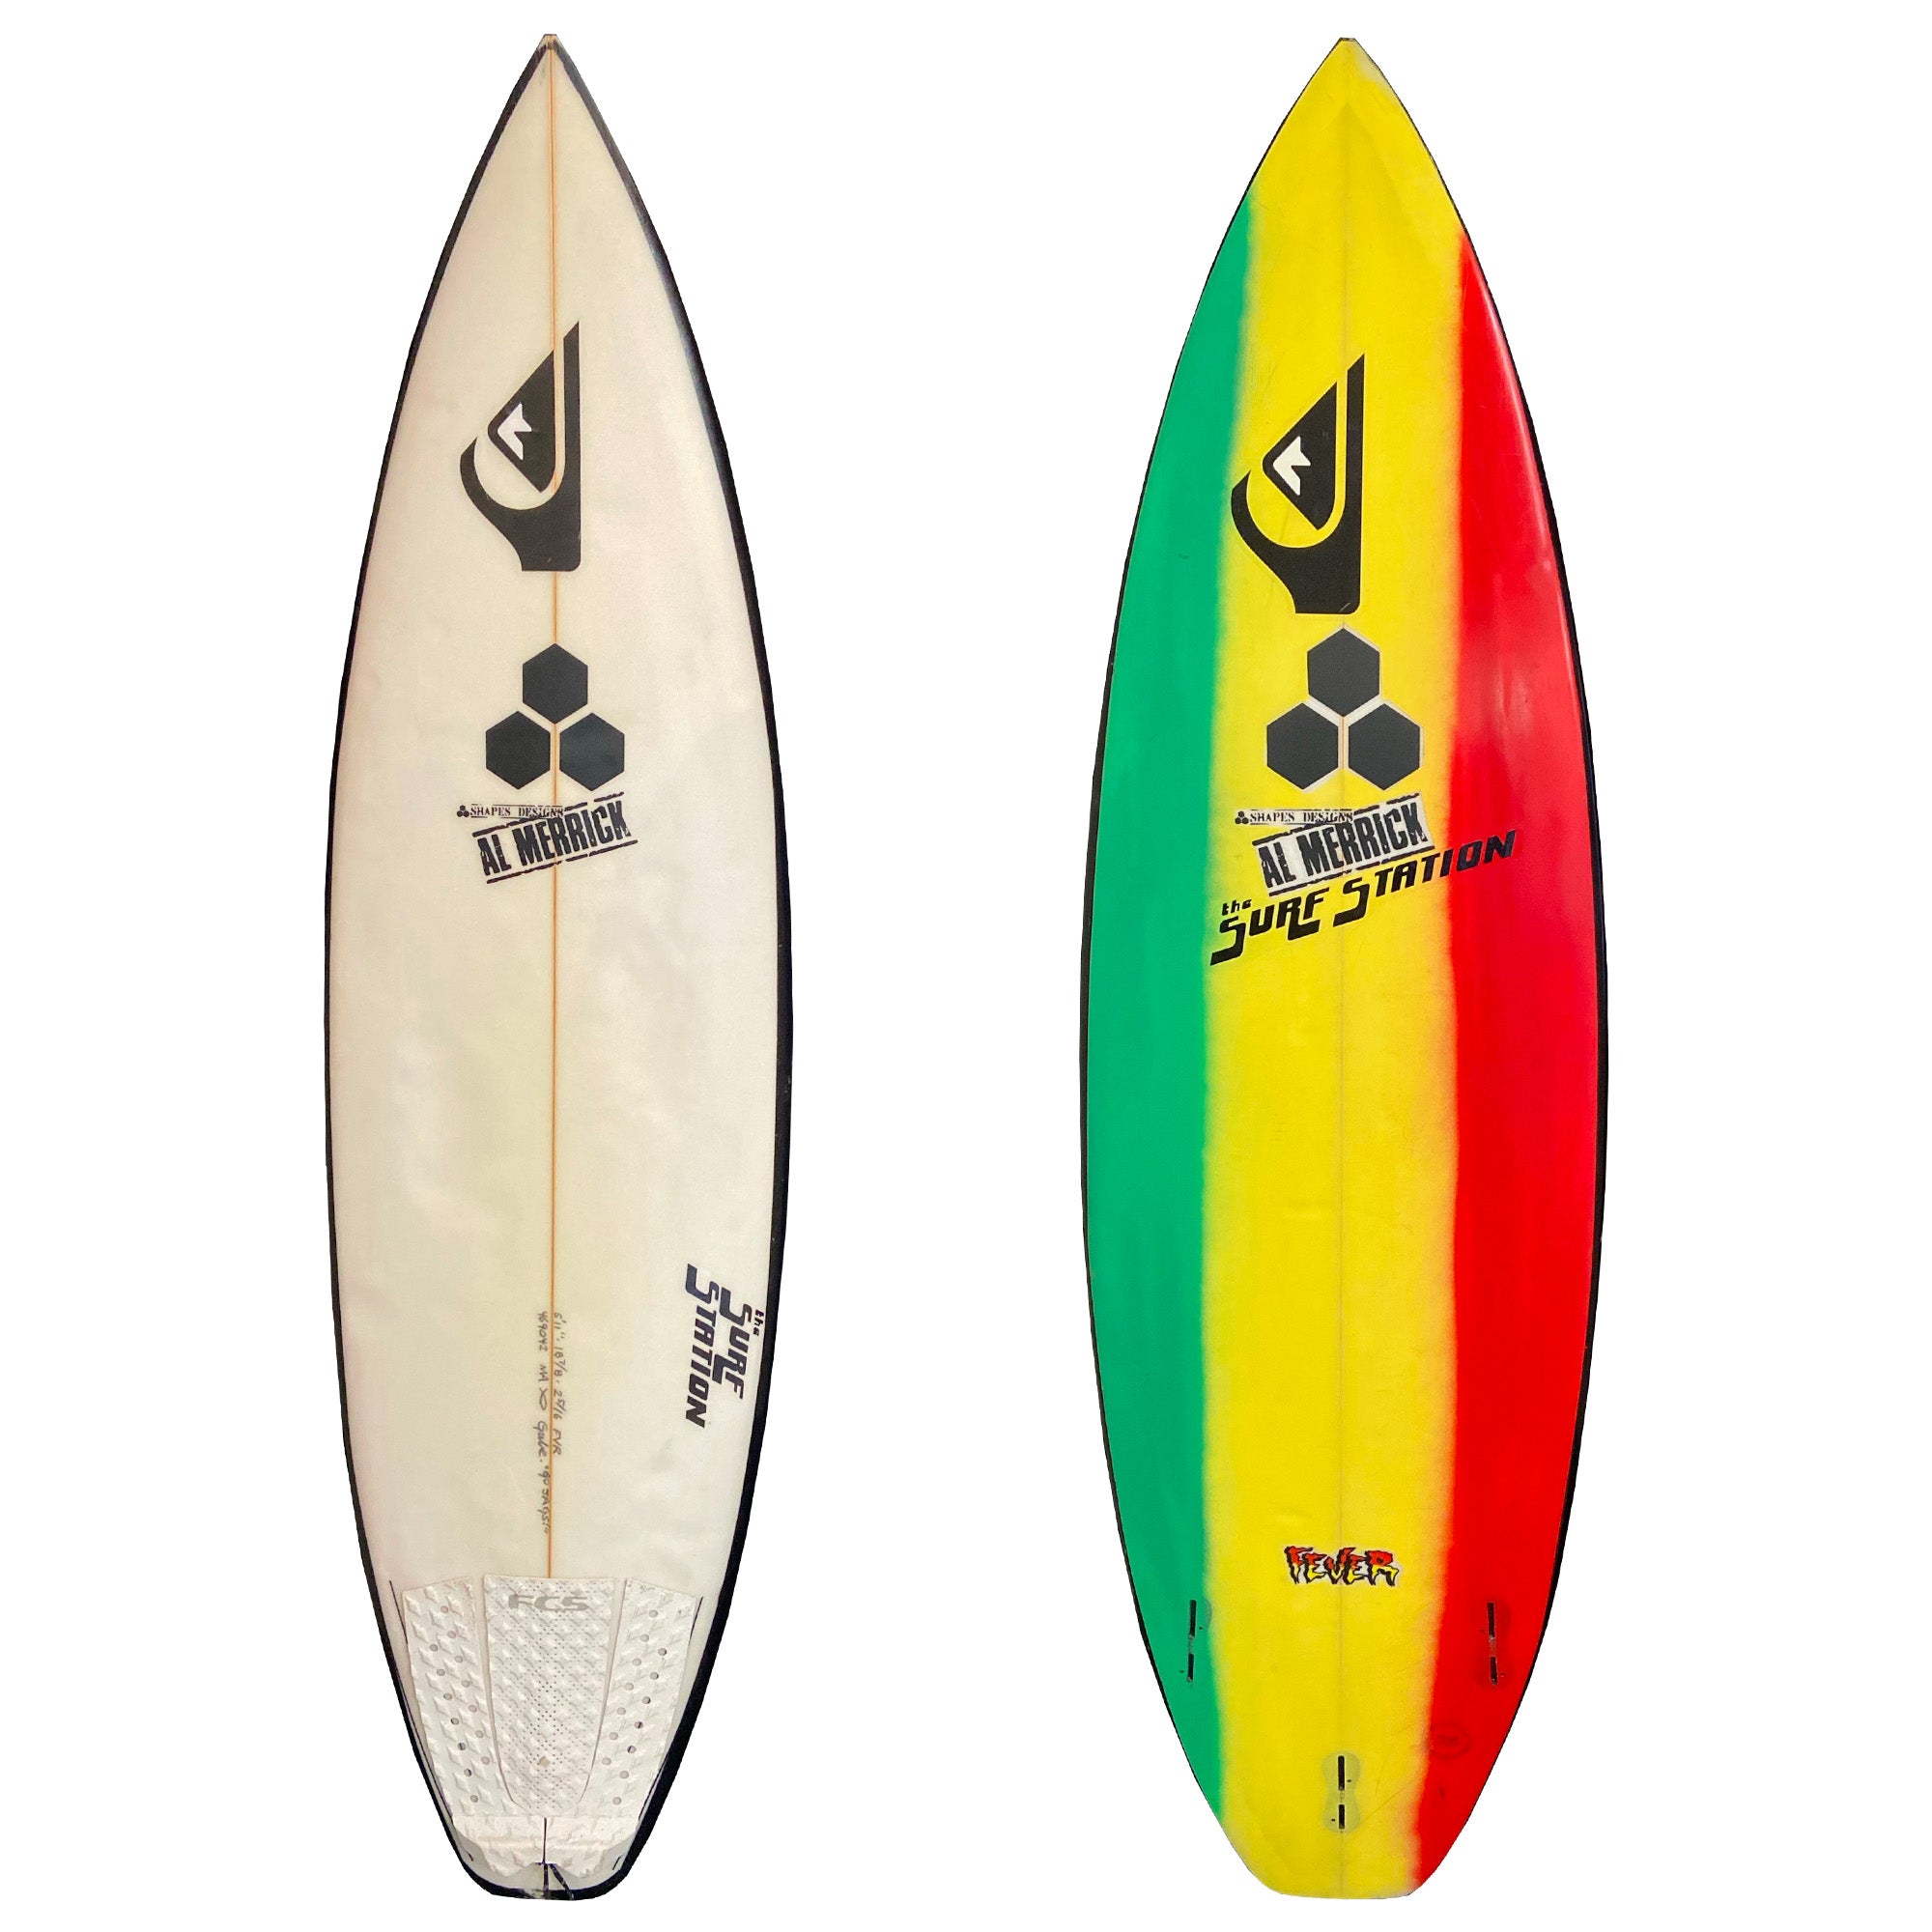 Channel Islands Fever 5'11 Used Surfboard